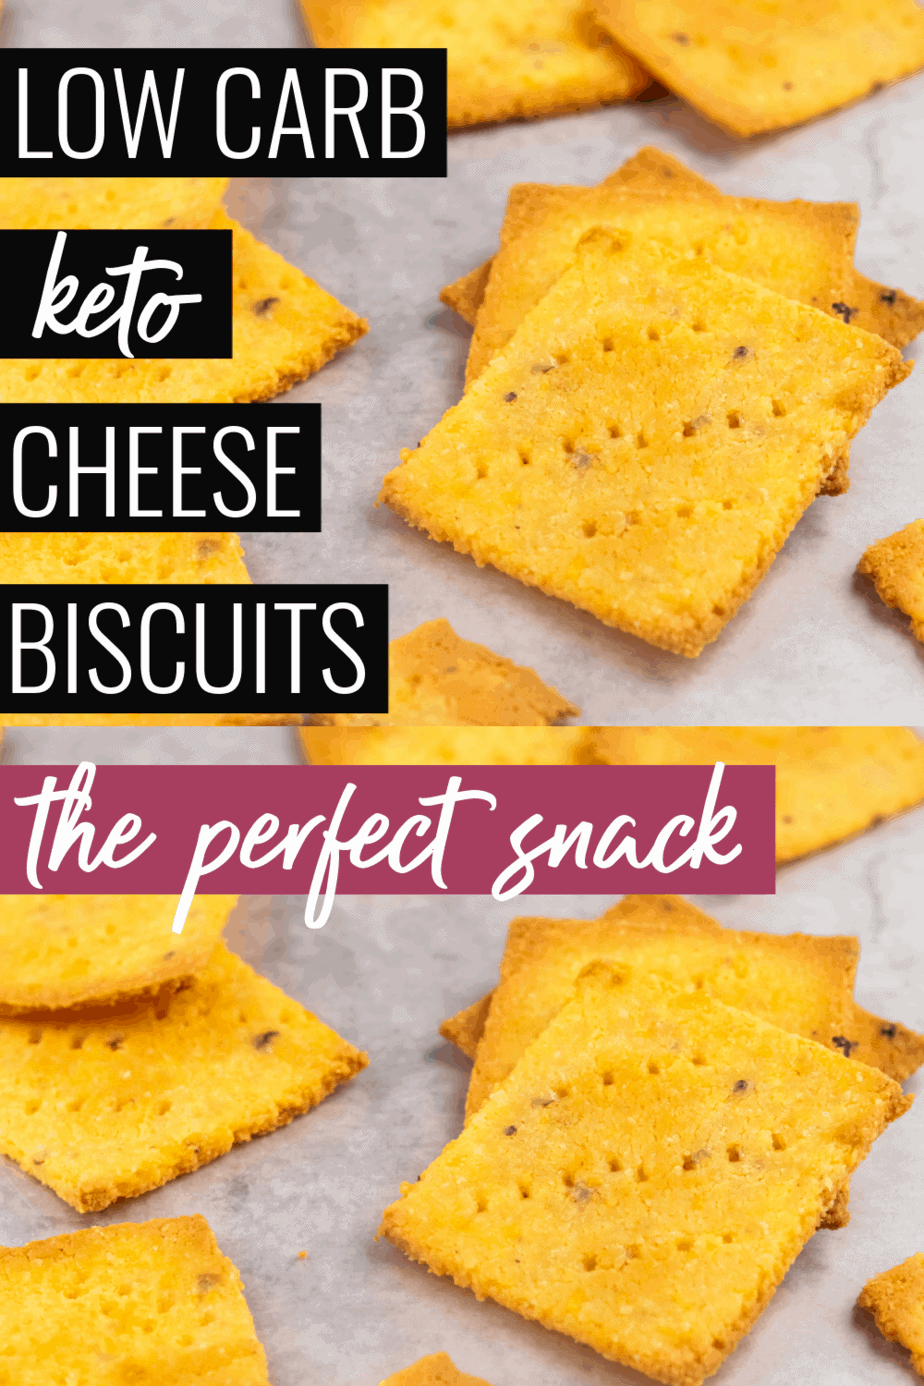 Low Carb Keto Cheese Biscuits